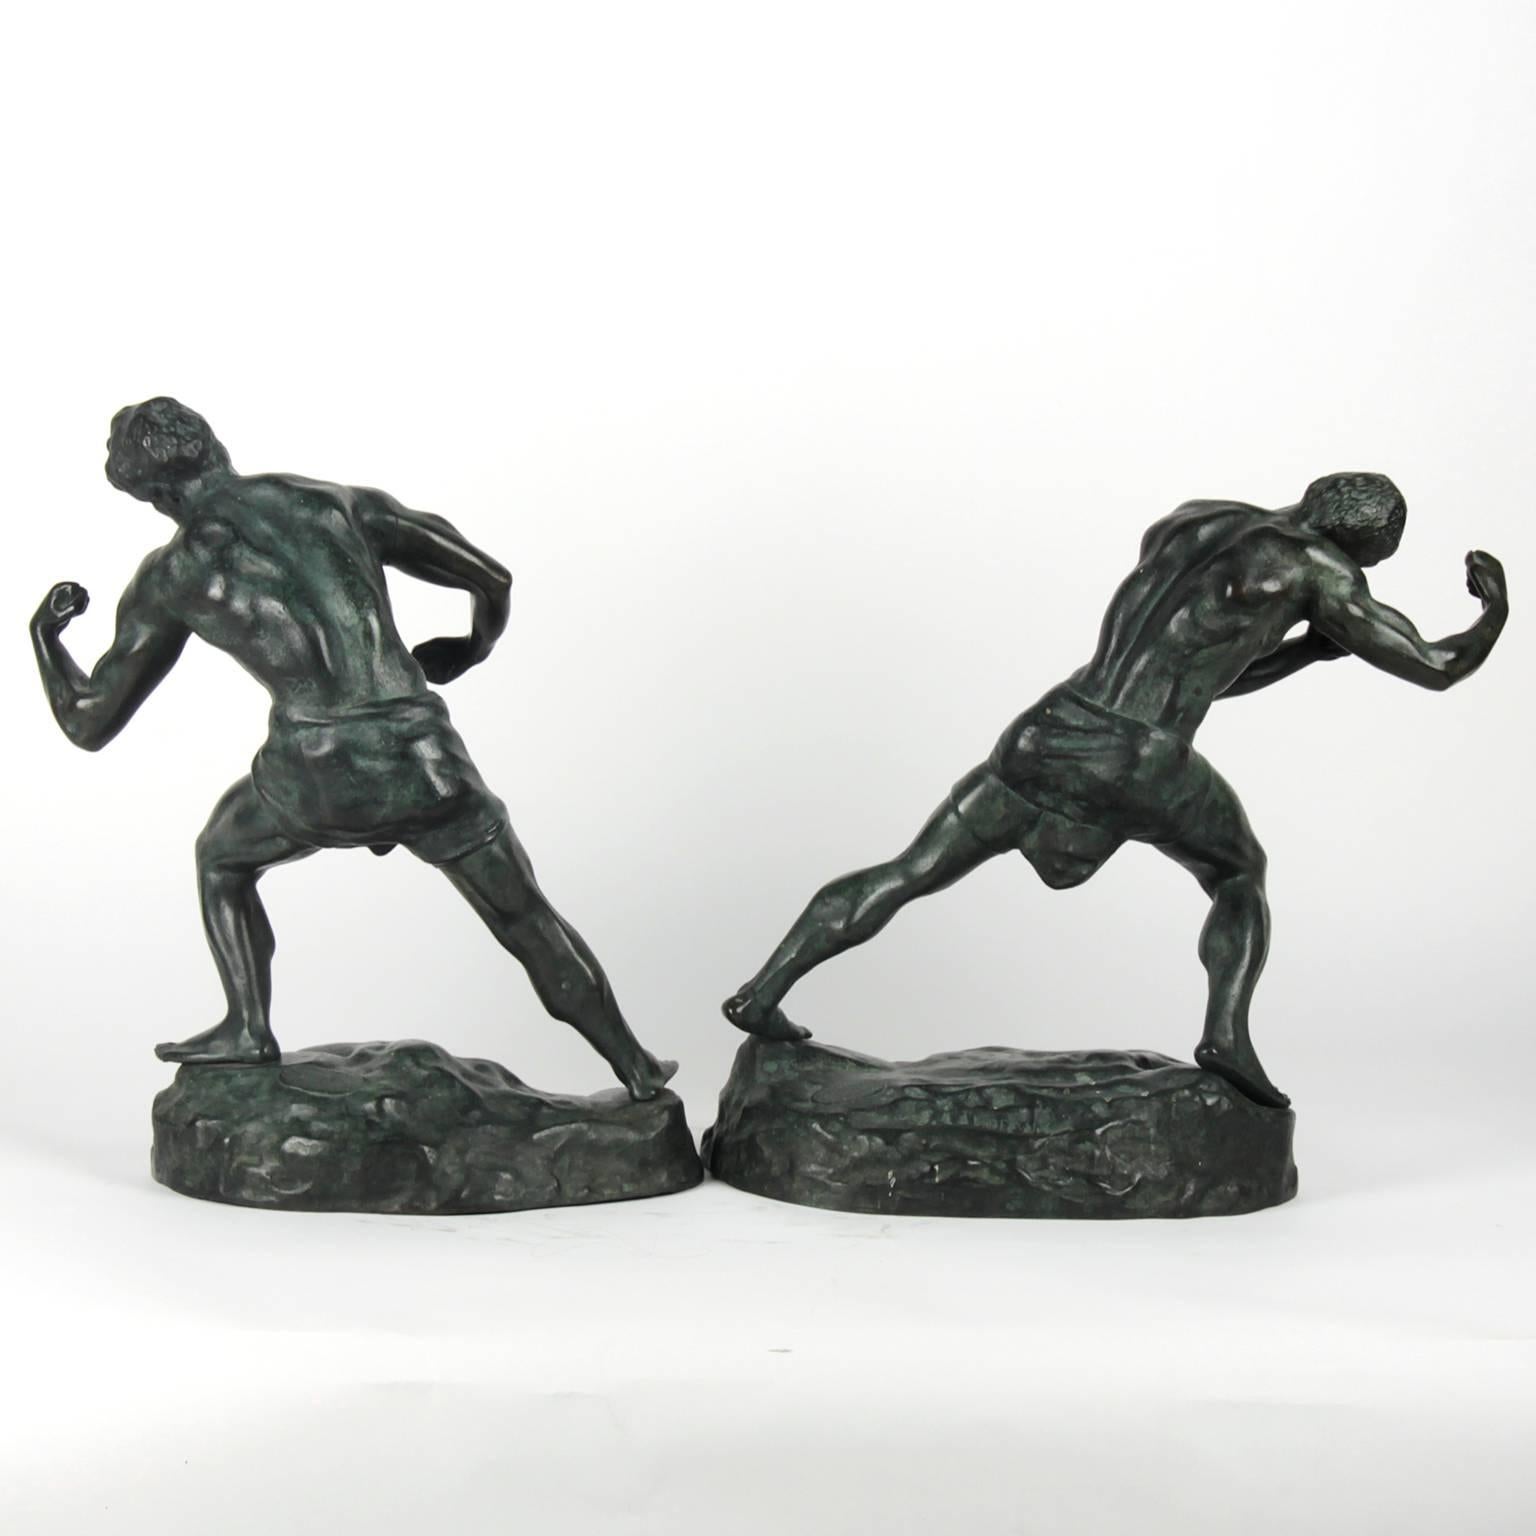 boxing figurines for sale